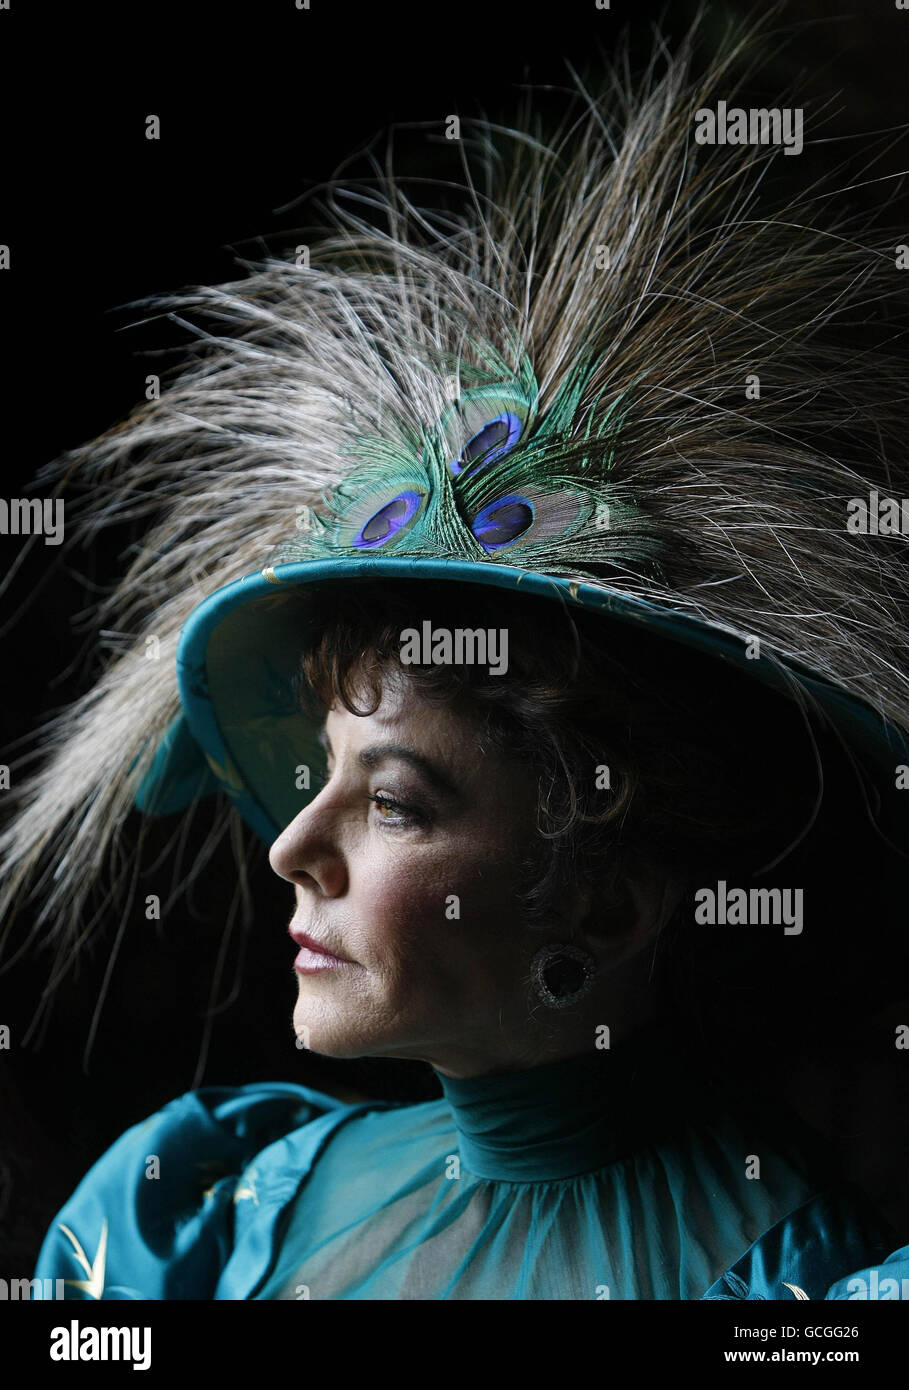 West Wing star Stockard Channing who will play Lady Bracknell in Rough Magic's production of The Importance of Being Earnest, during a photocall in Dublin, ahead of it's opening at the Gaiety Theatre and which runs from June 2-19. Stock Photo